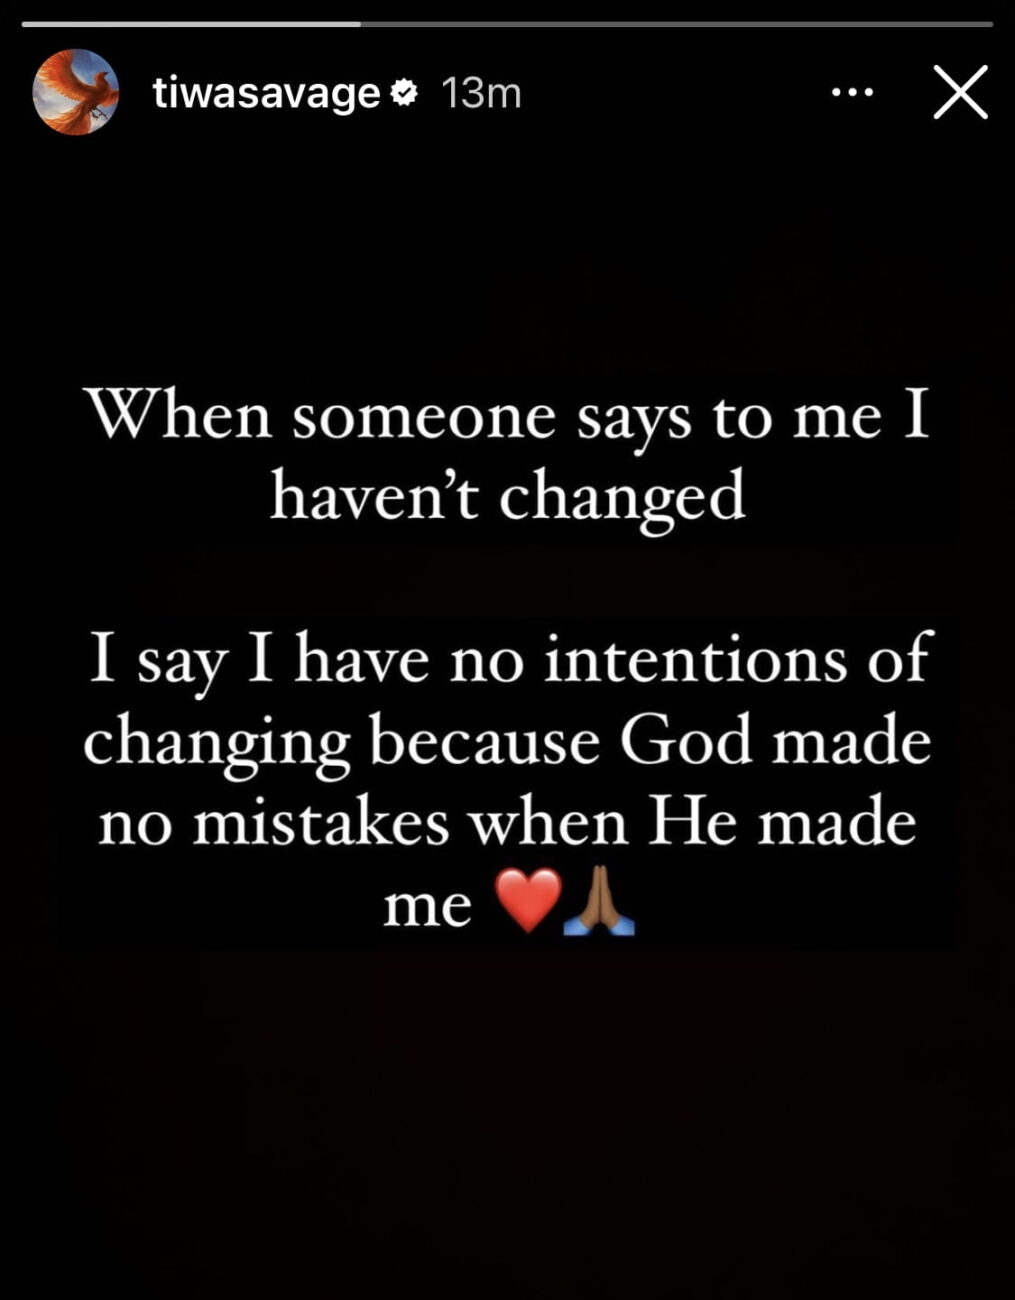 Tiwa Savage’s post on Instagram talking about how she has no intentions of changing.